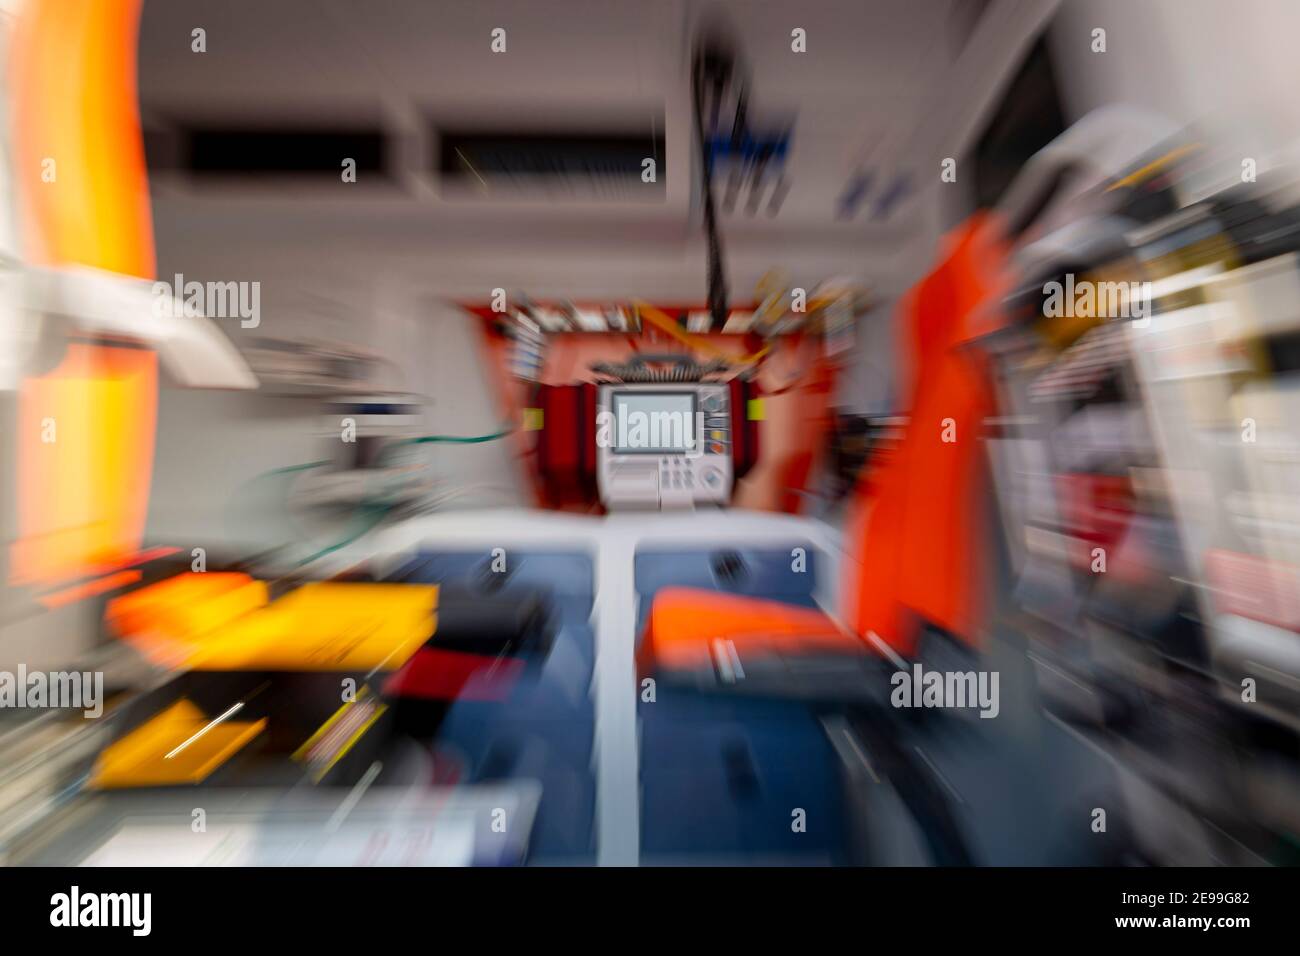 Defibrillator is seend inside of an ambulance. Defibrillation is a treatment for life-threatening cardiac dysrhythmias delivering a dose of electric c Stock Photo